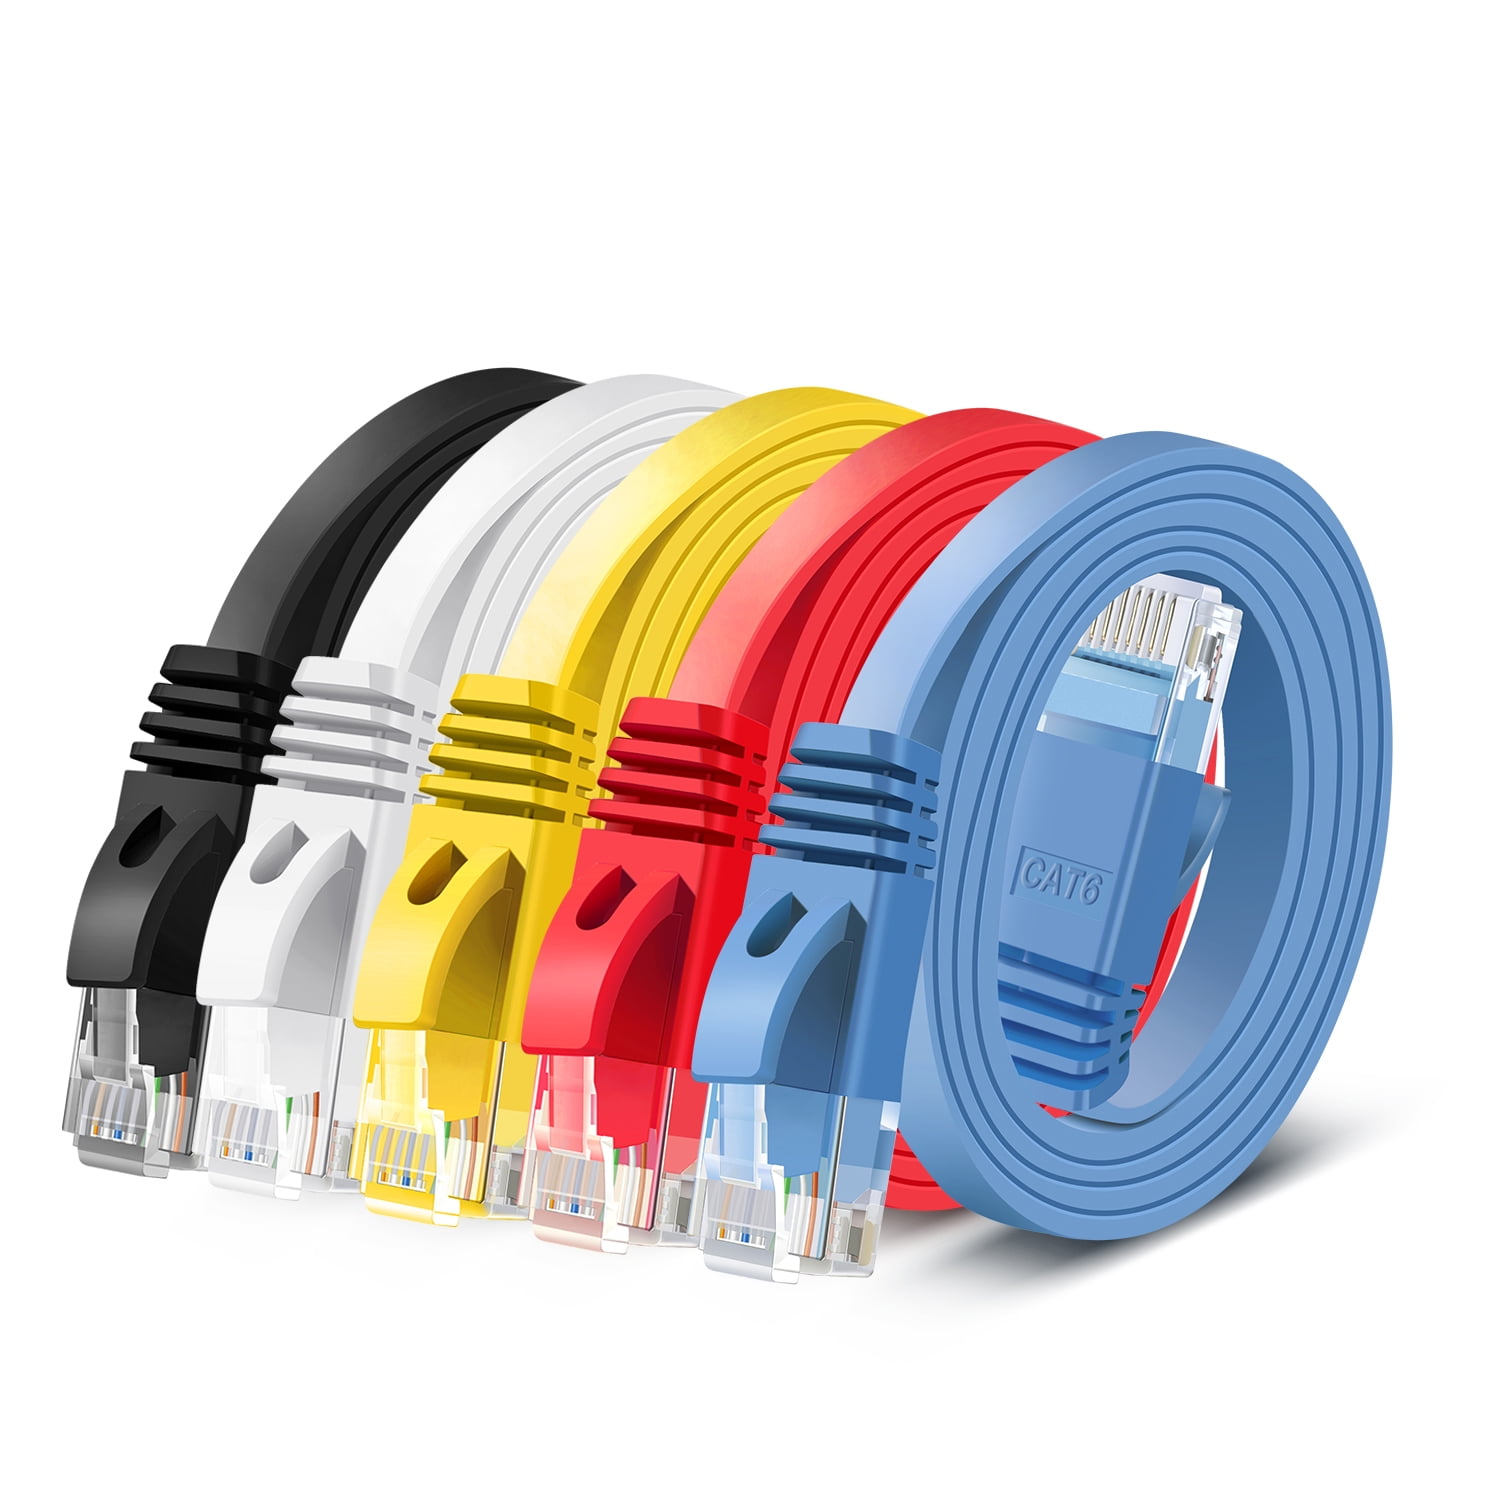 3FT Cat6 Ethernet Patch Flat Cable 5 Pack Snagless RJ45 Networking Wire Cord